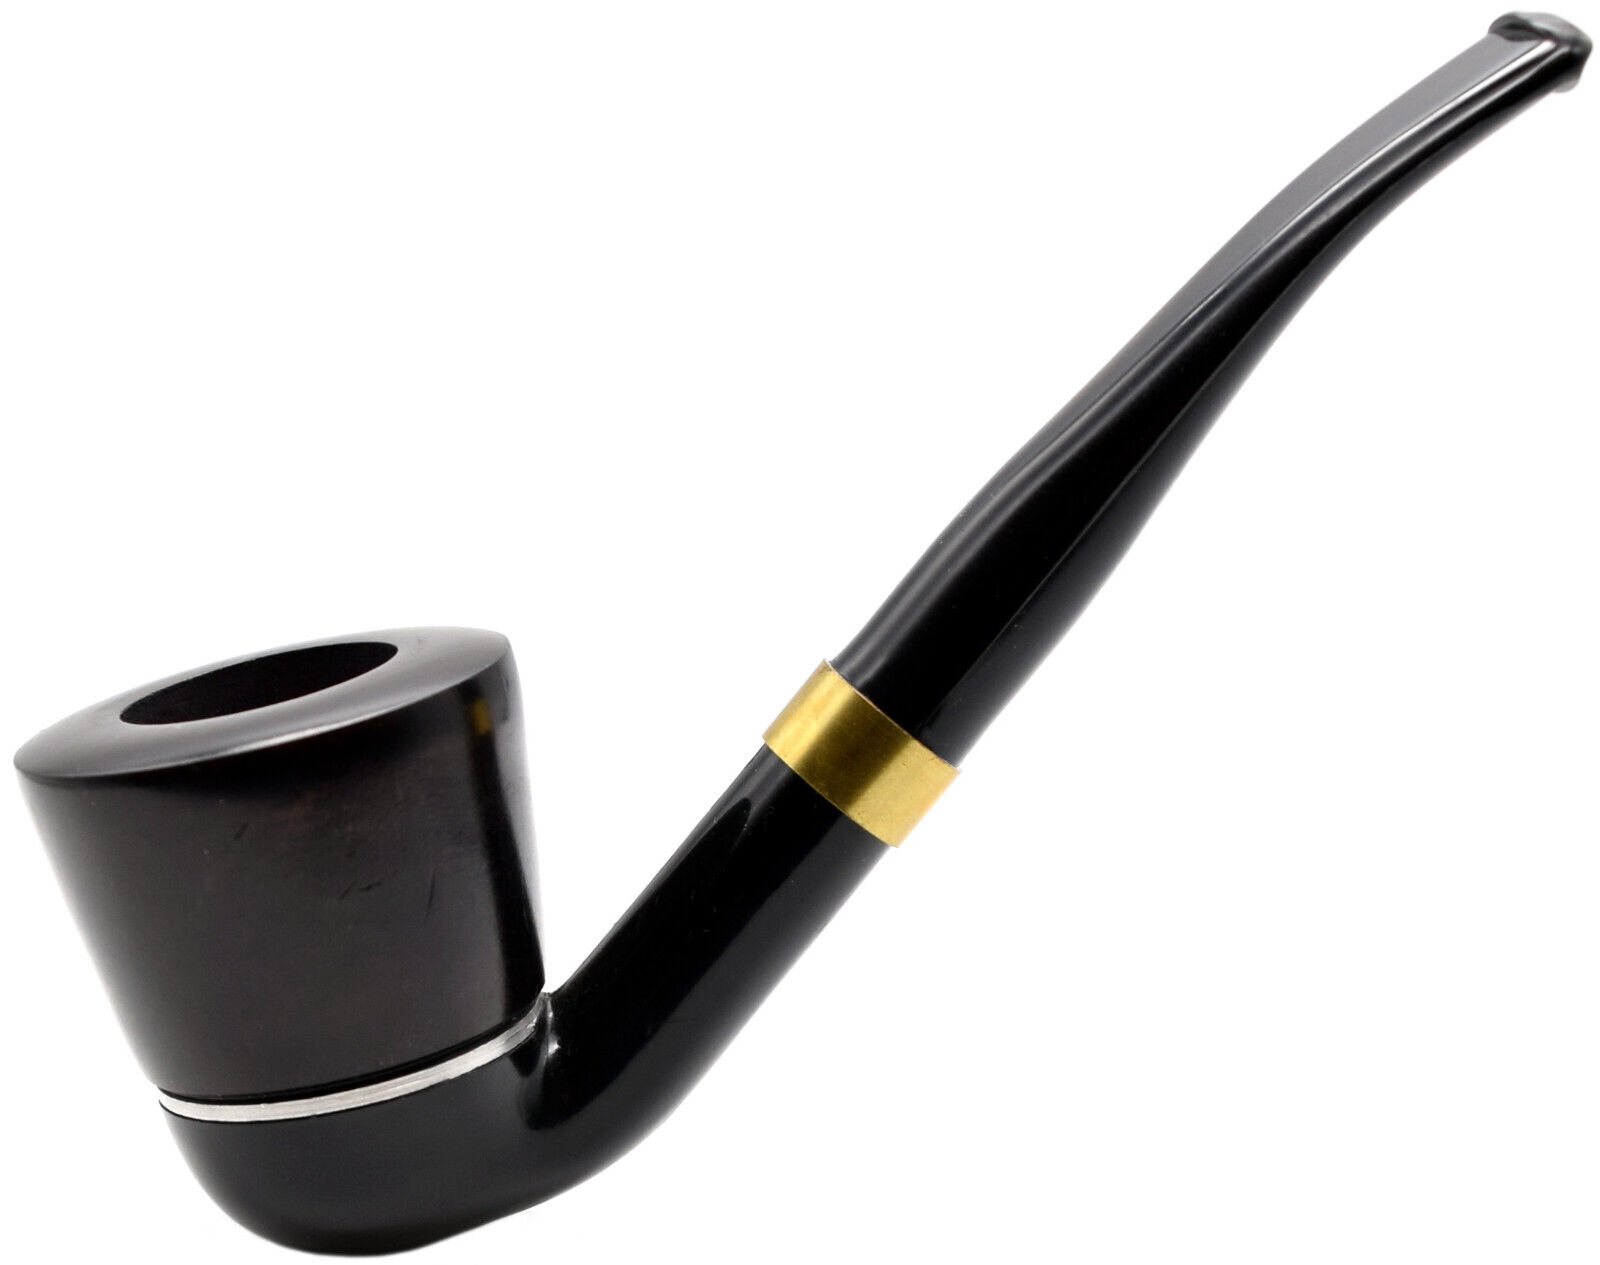 Falcon International Bent Stem Filter Pipe with a Smooth Dark Algiers Bowl